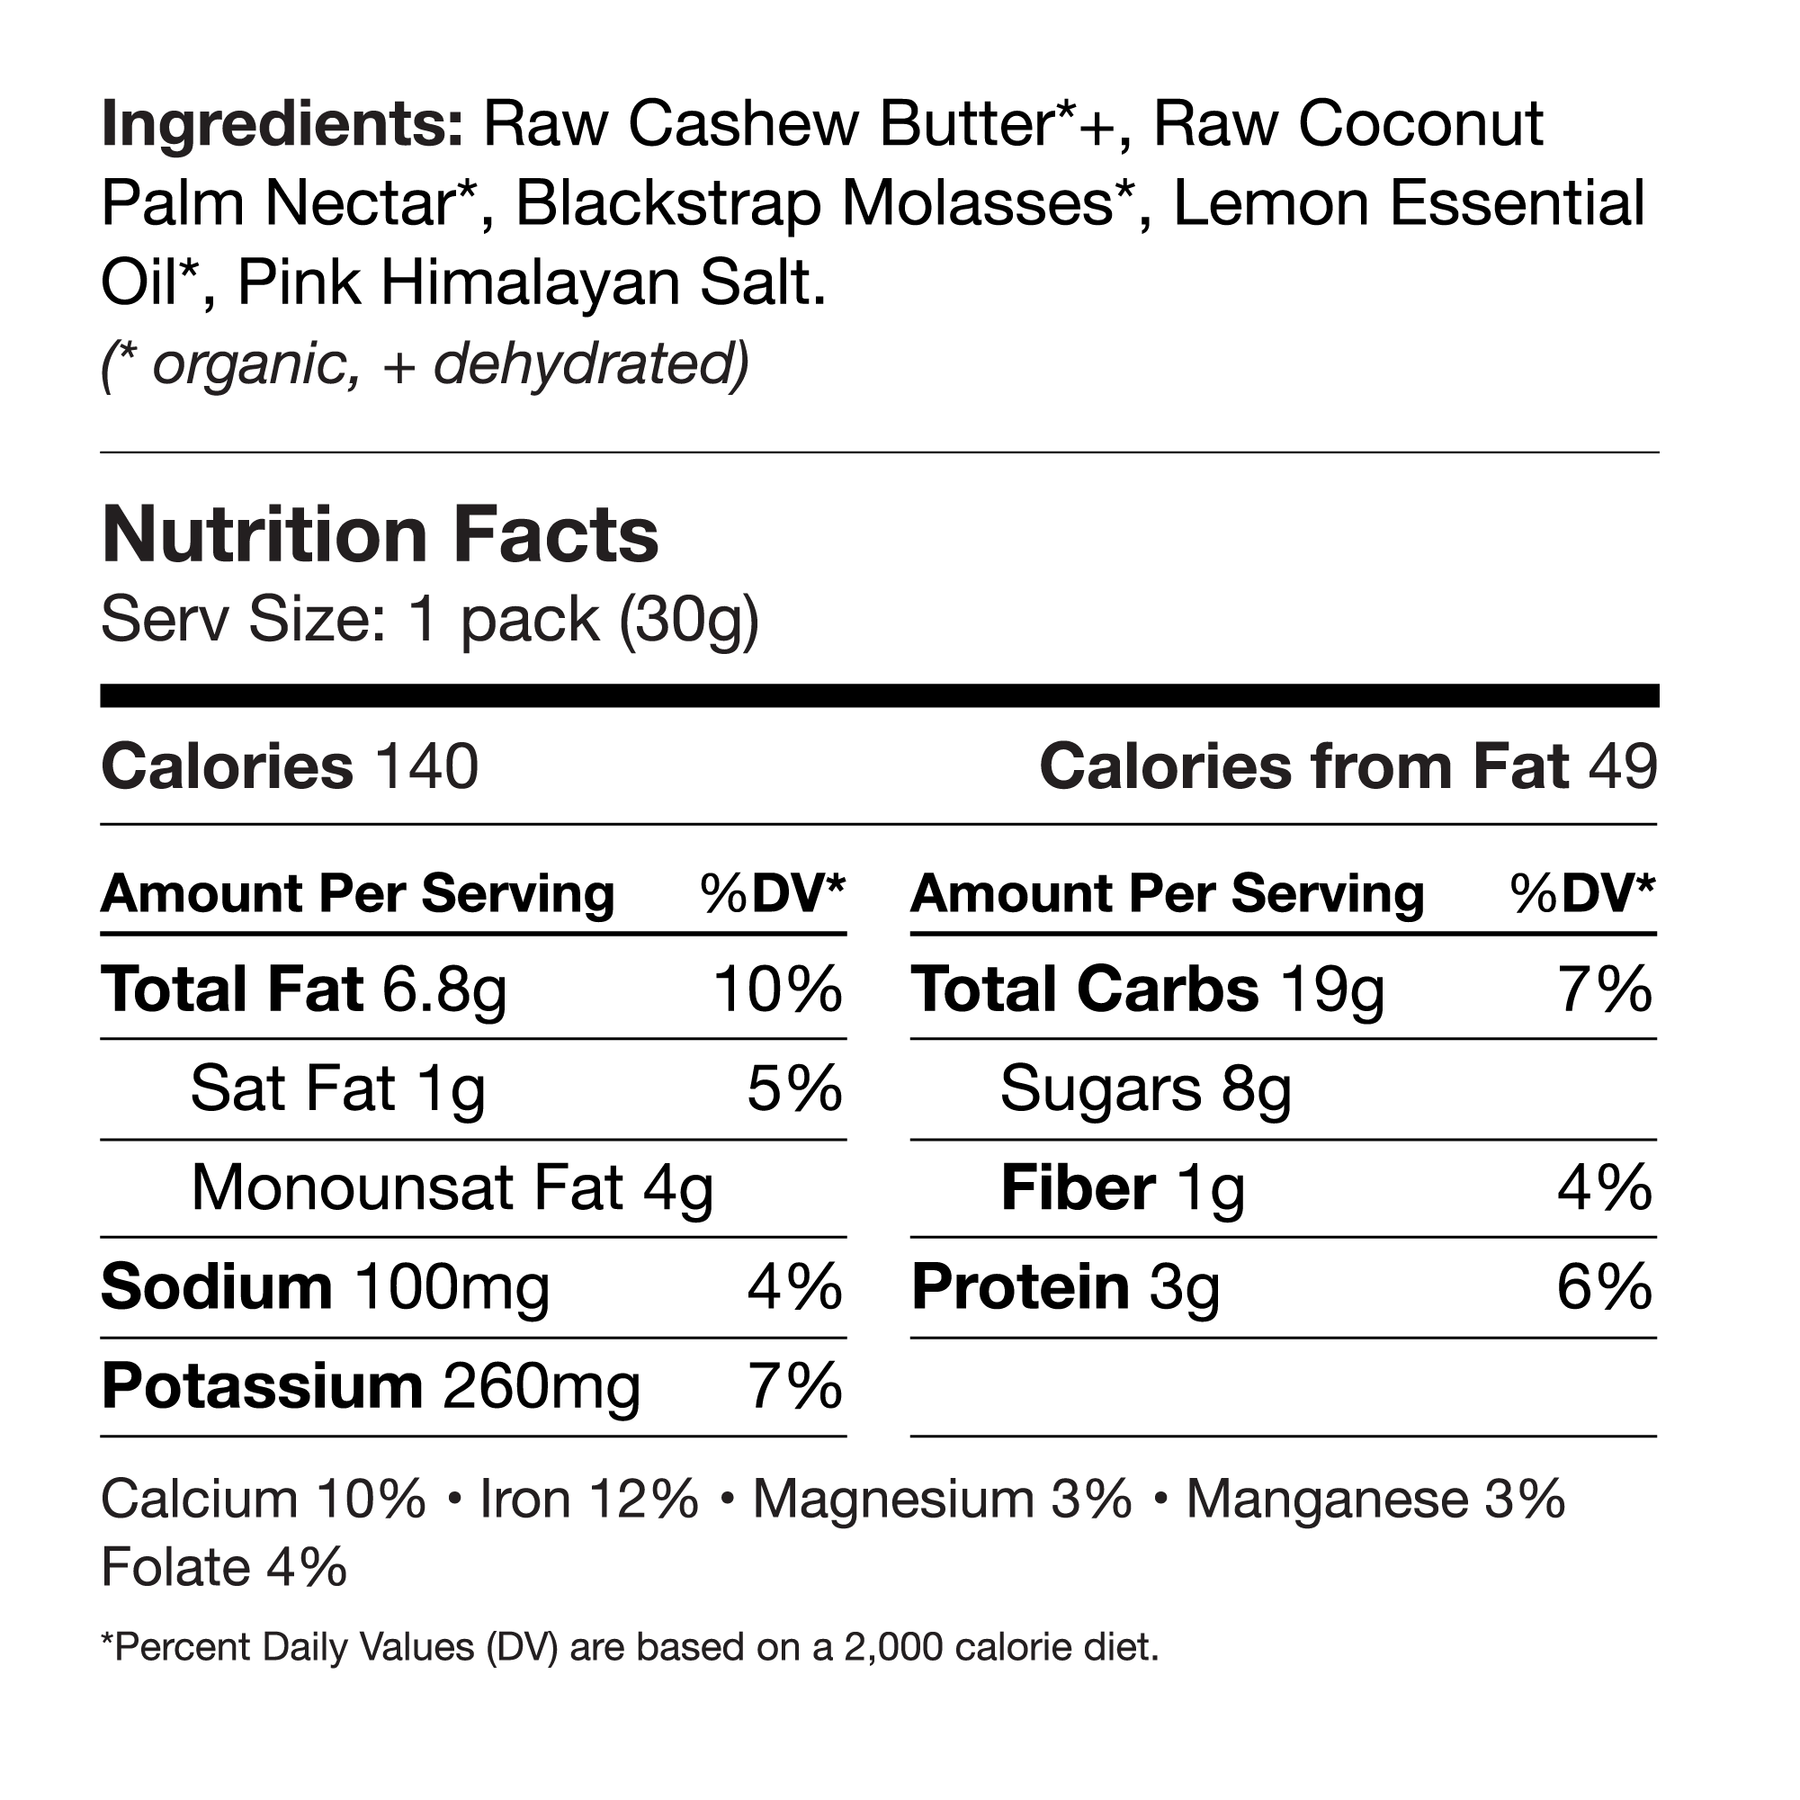 the nutrition facts panel, showing 140 calories per serving